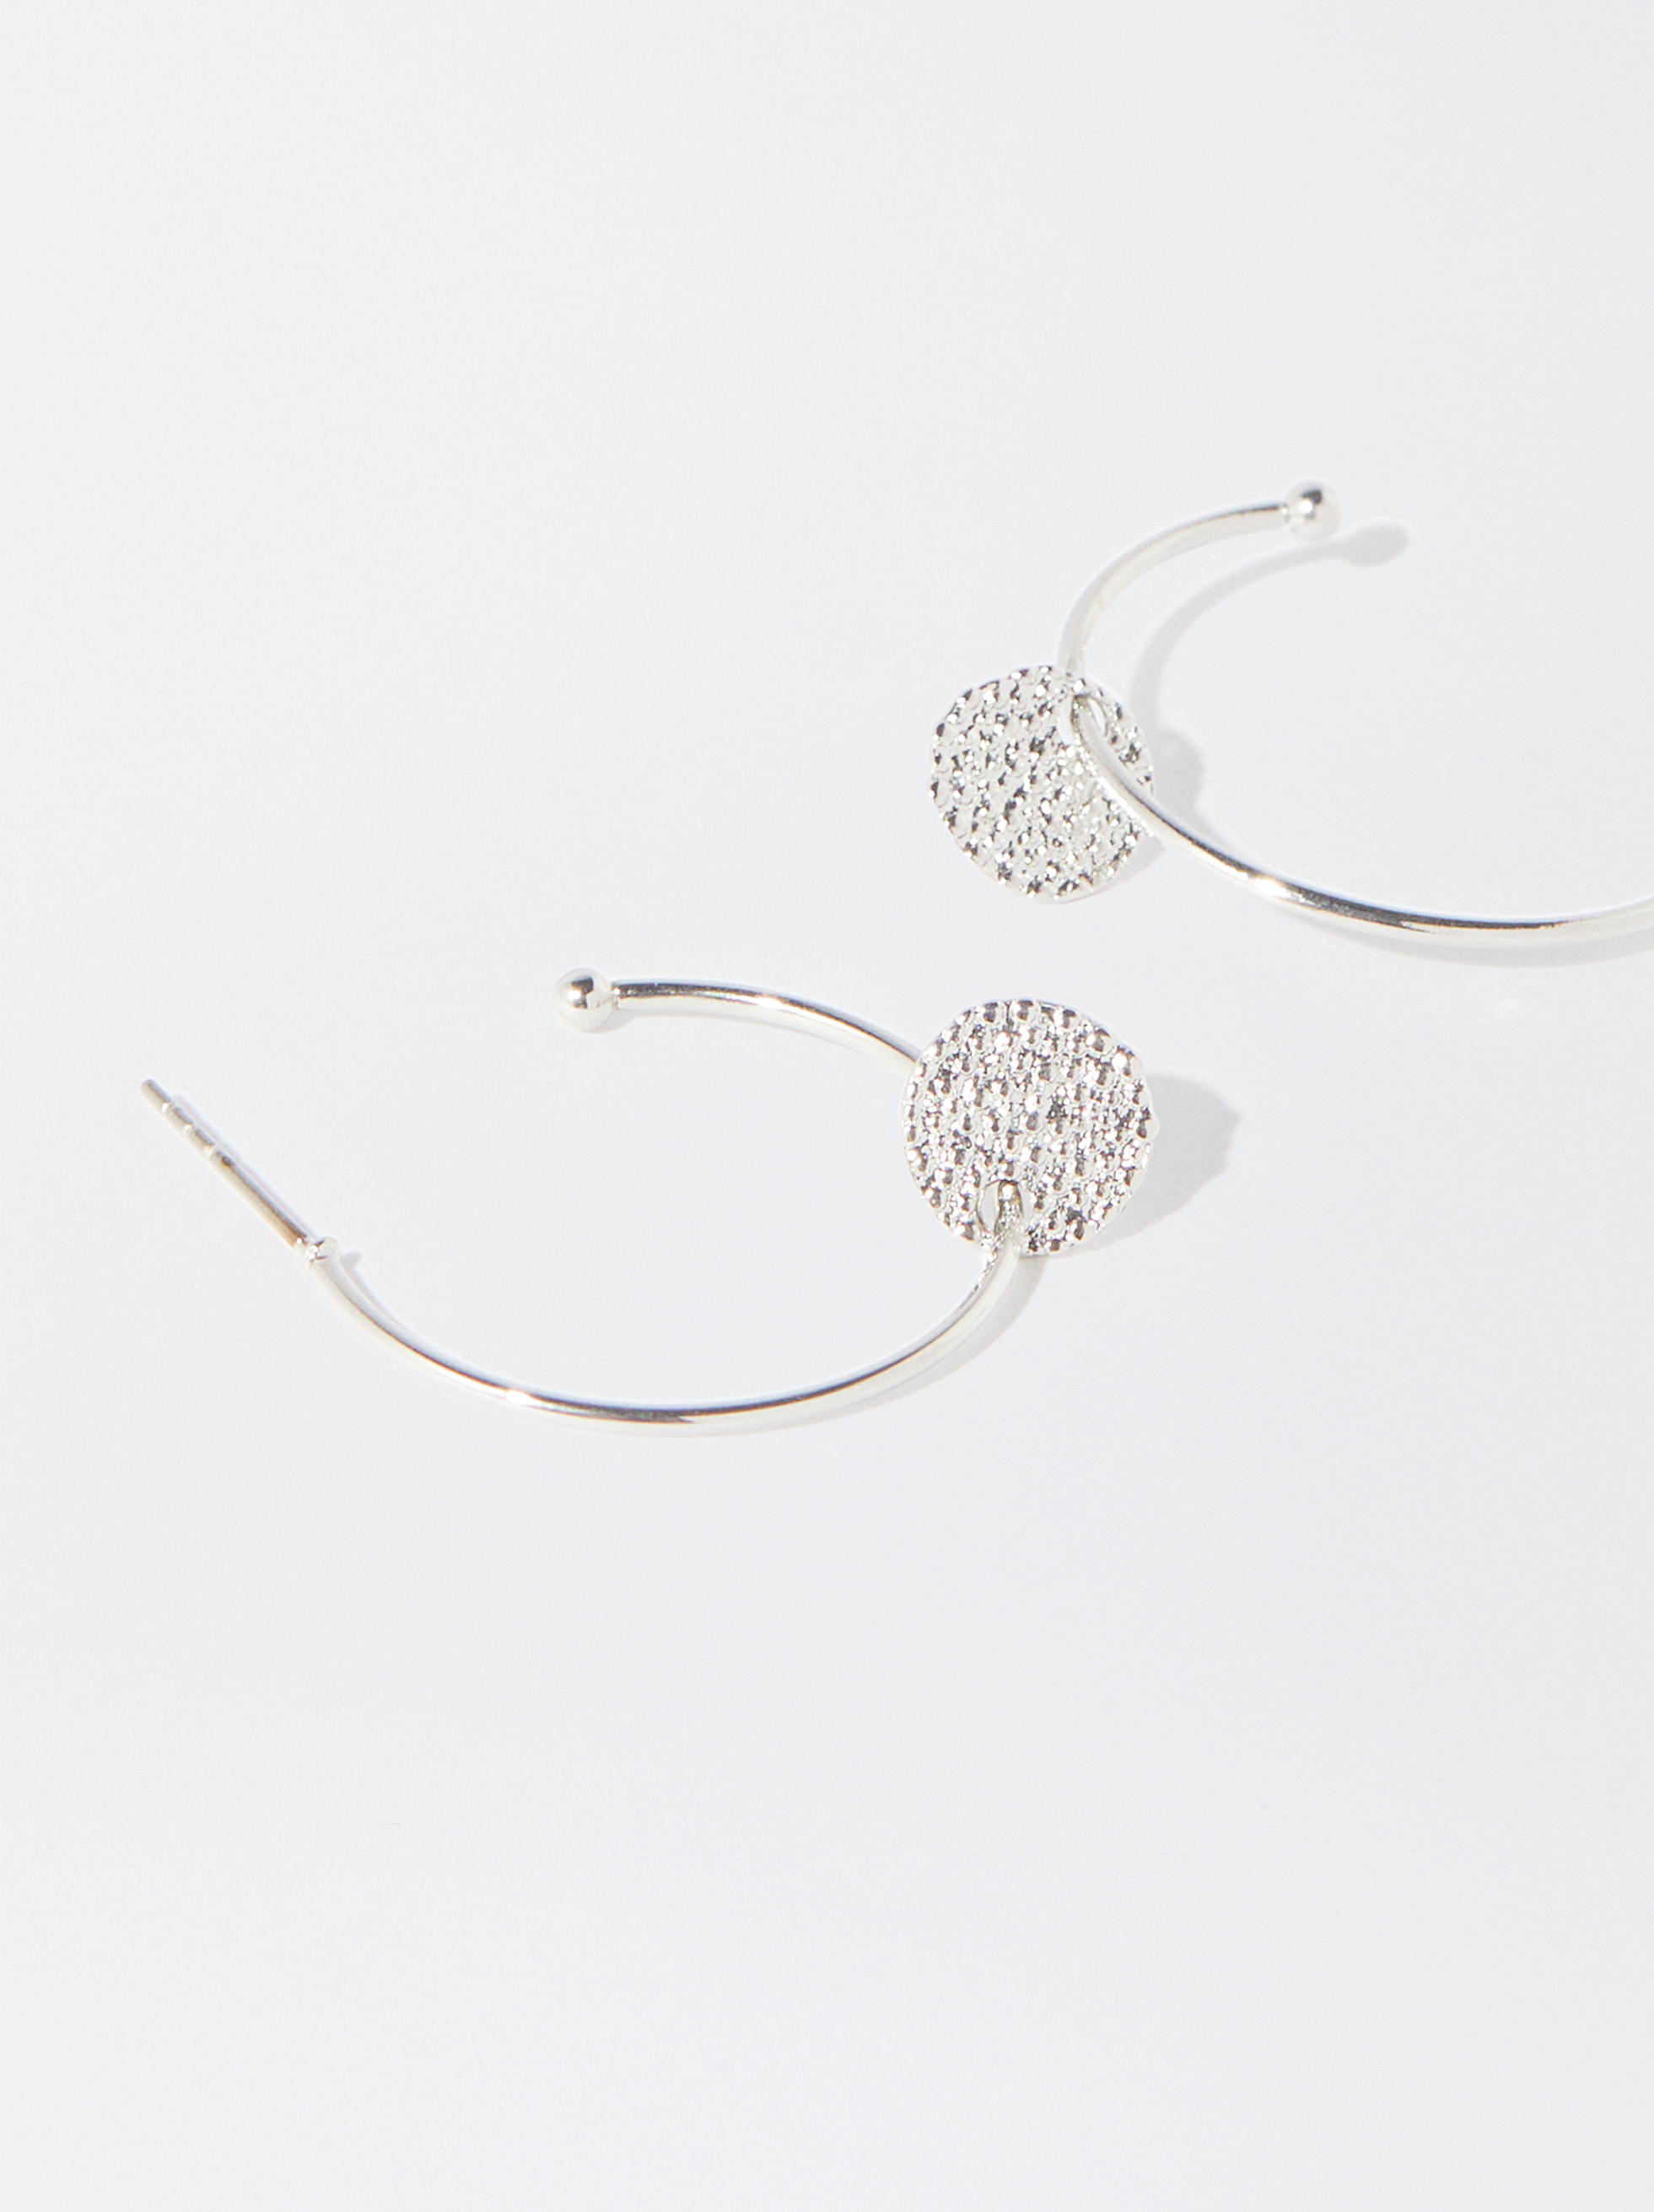 Gold-Toned Hoop Earrings With Medallions image number 2.0